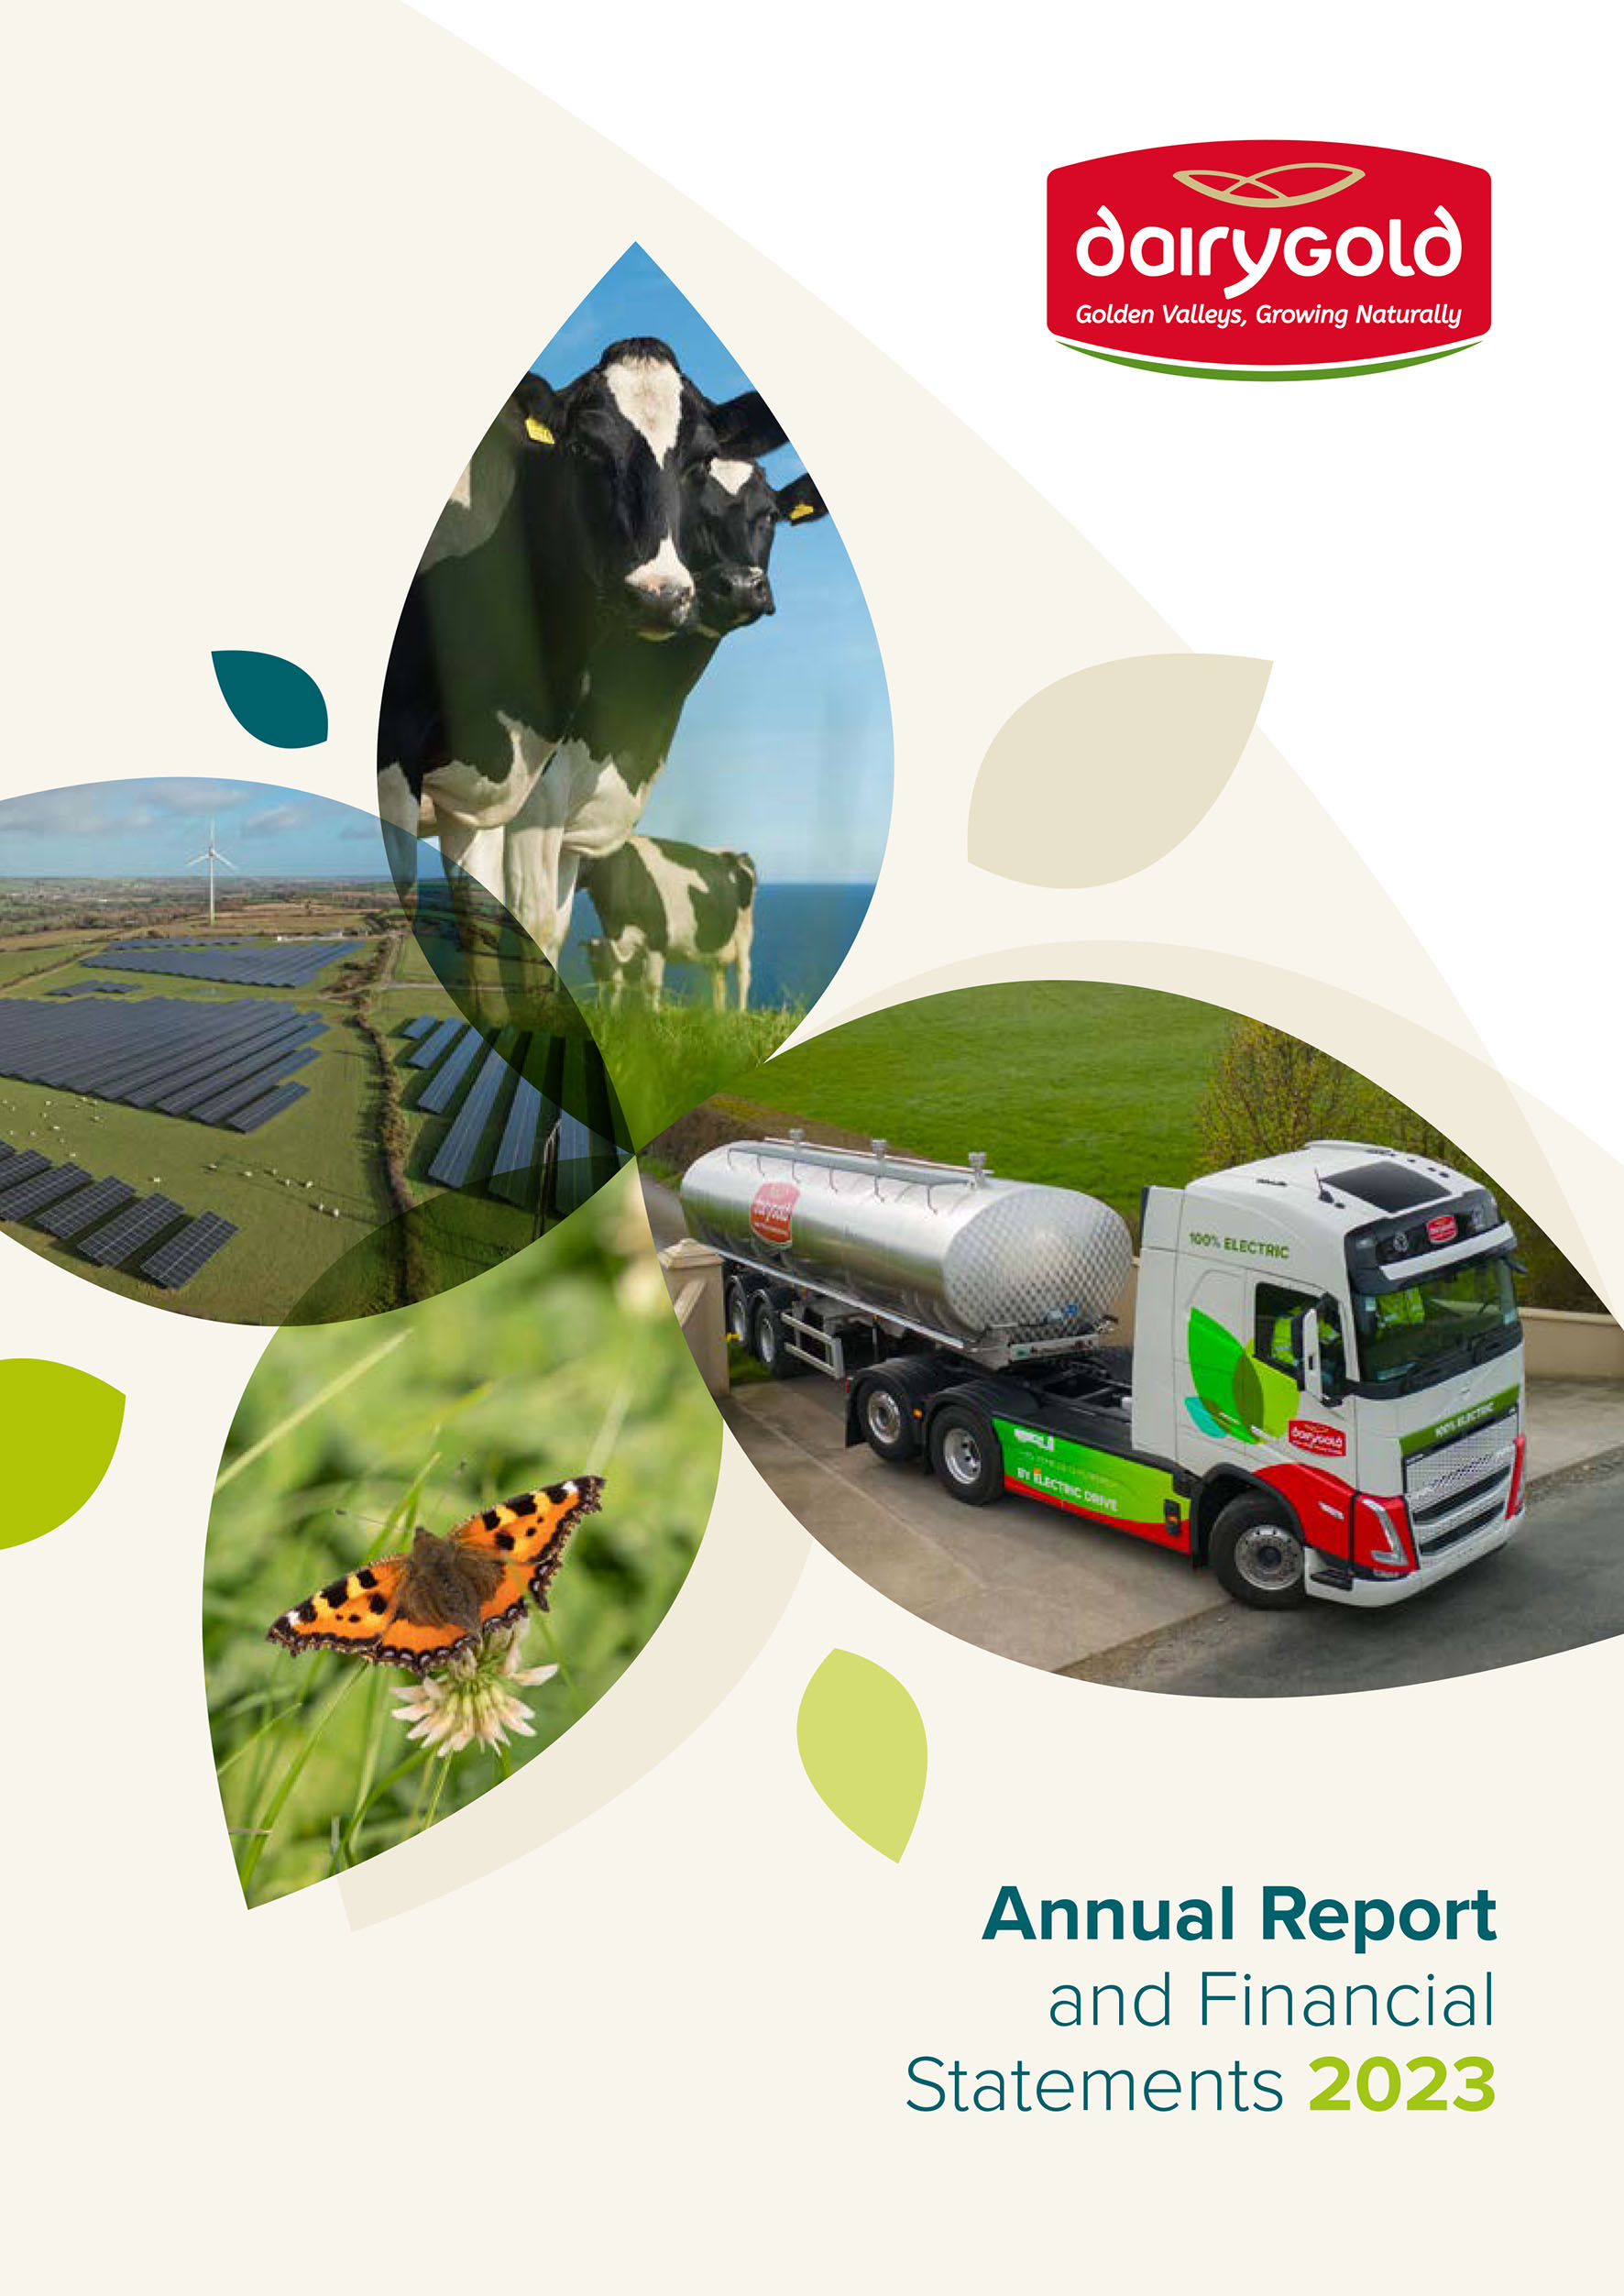 Annual Report and Financial Statements 2023